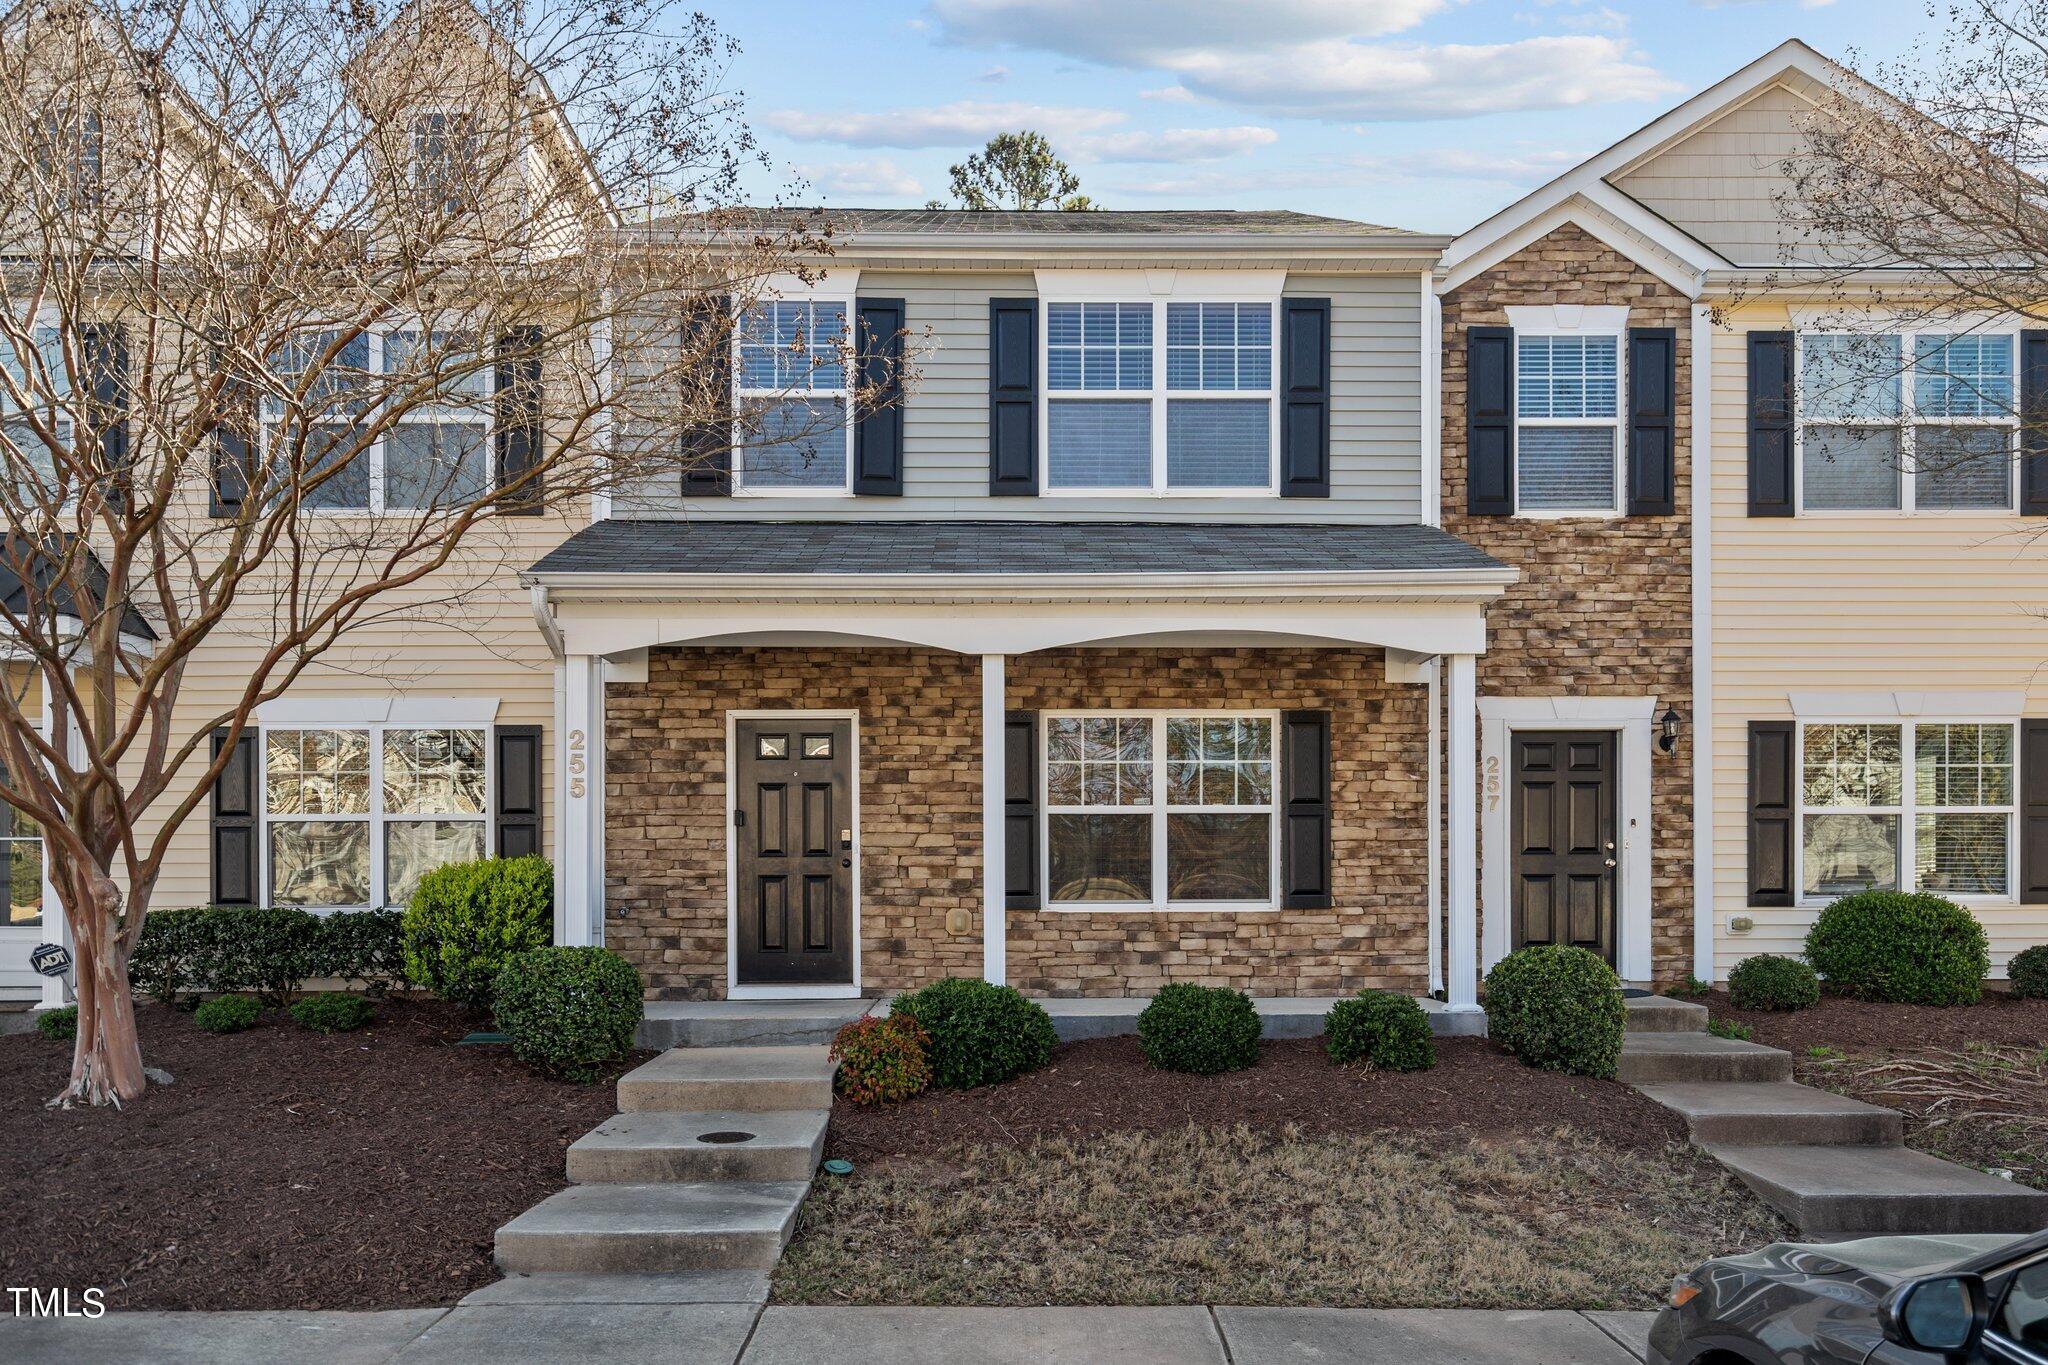 Photo one of 255 Hampshire Downs Dr Morrisville NC 27560 | MLS 10018450